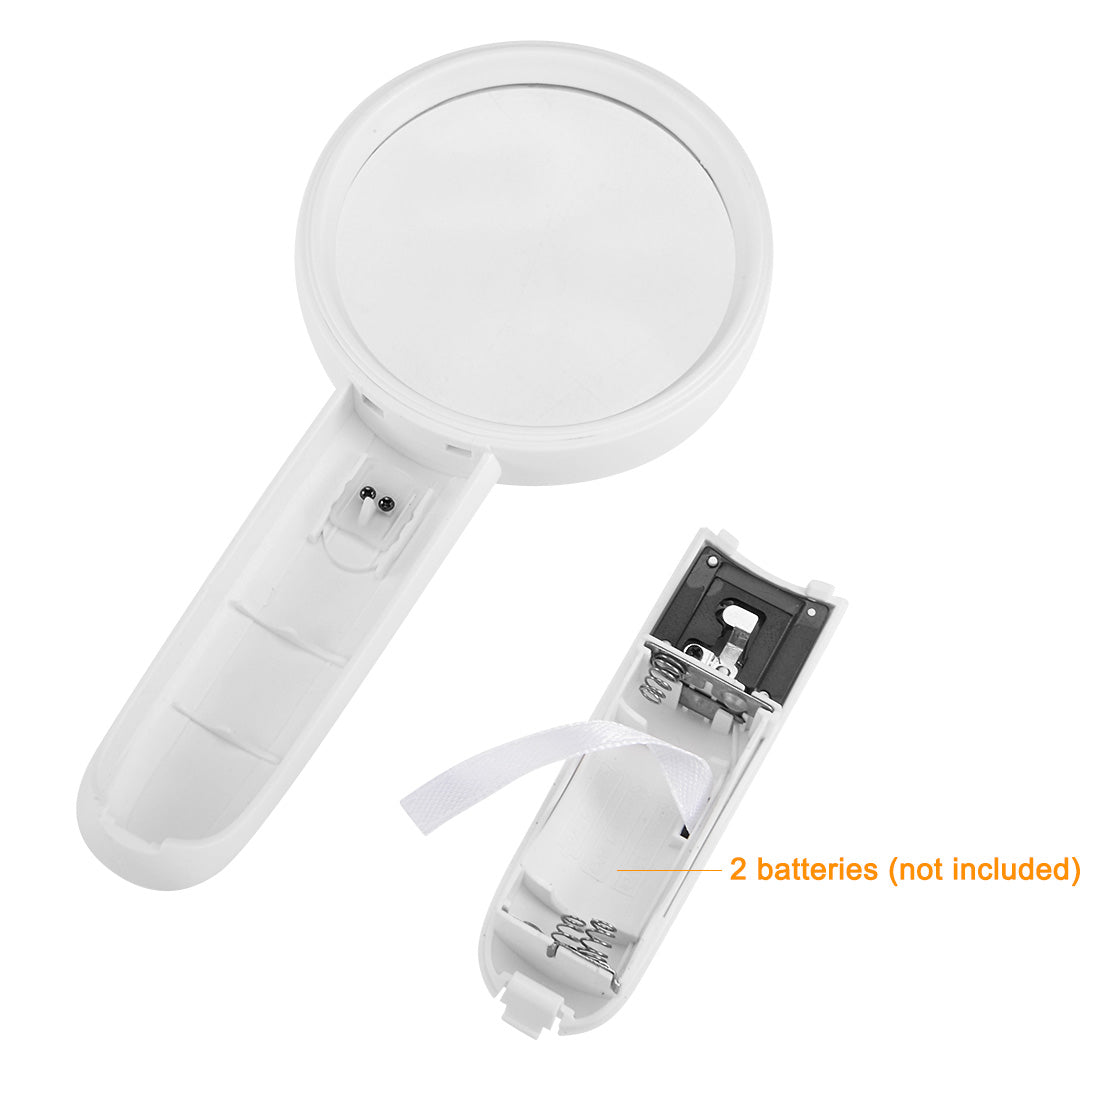 uxcell Uxcell 3X LED Illuminated Handheld Magnifier 300% Loupe w LED light for Book, Repair